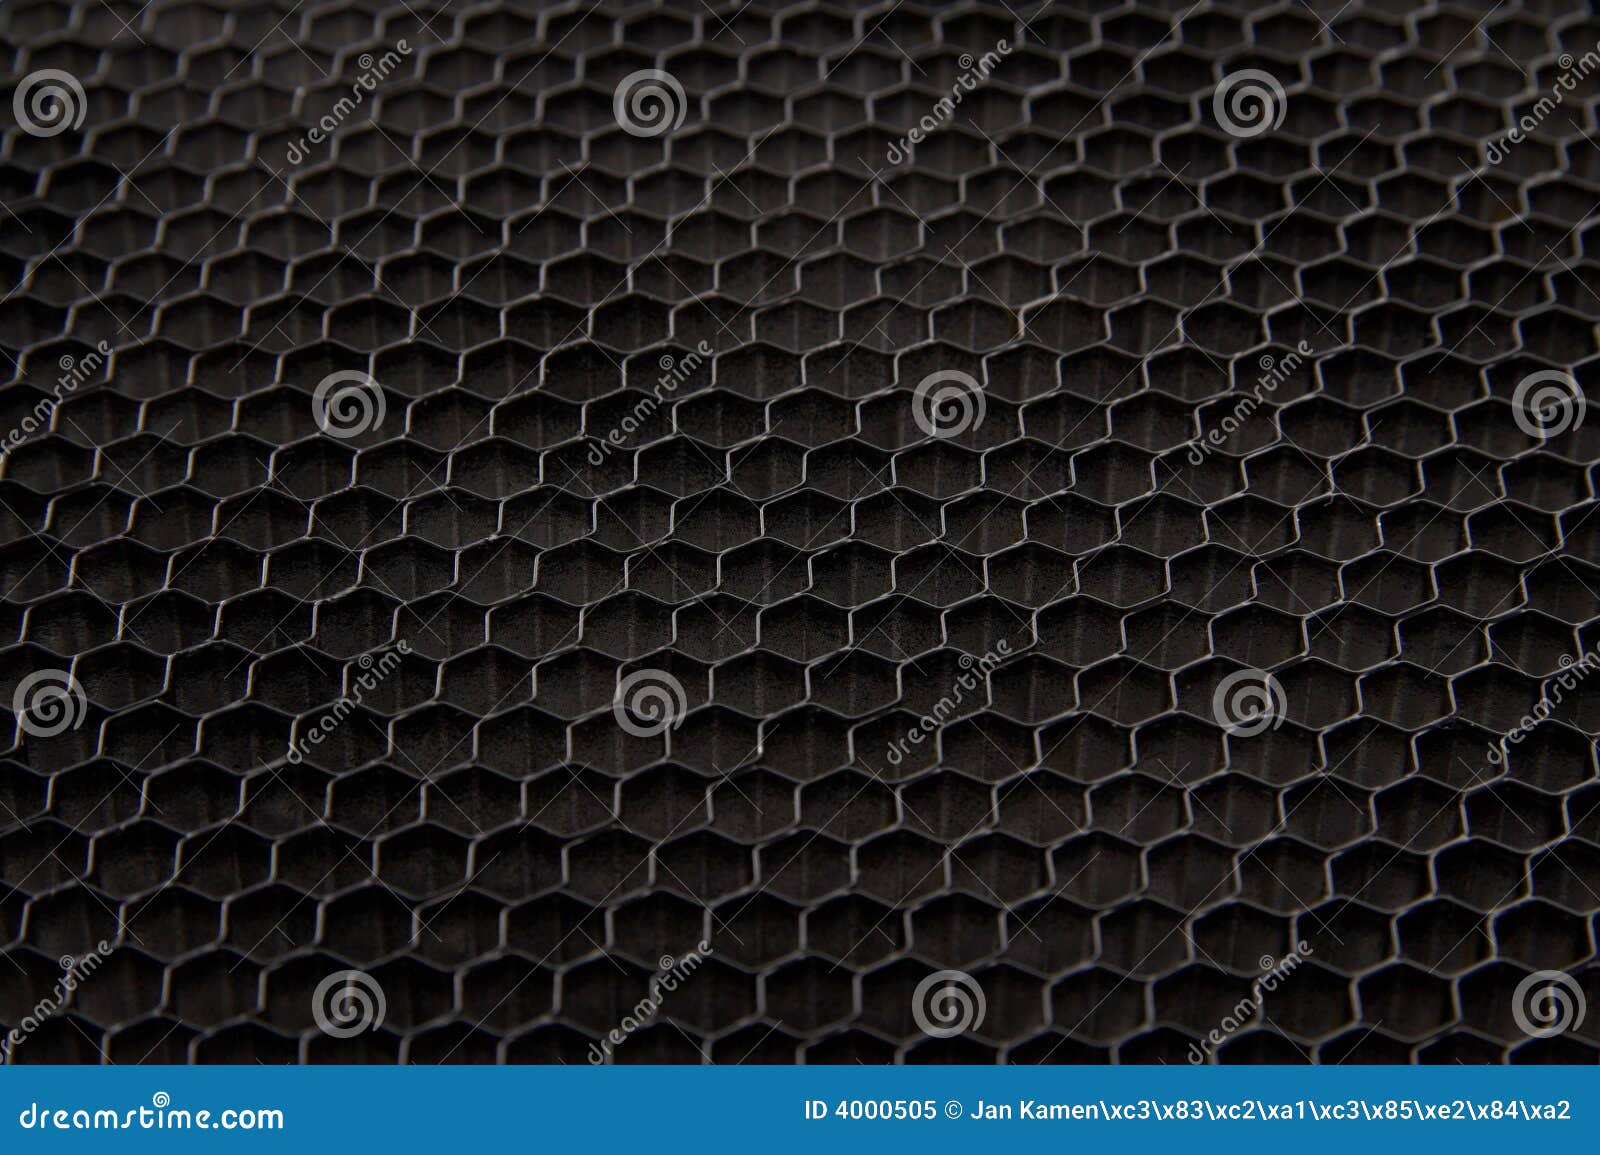 abstract technical background